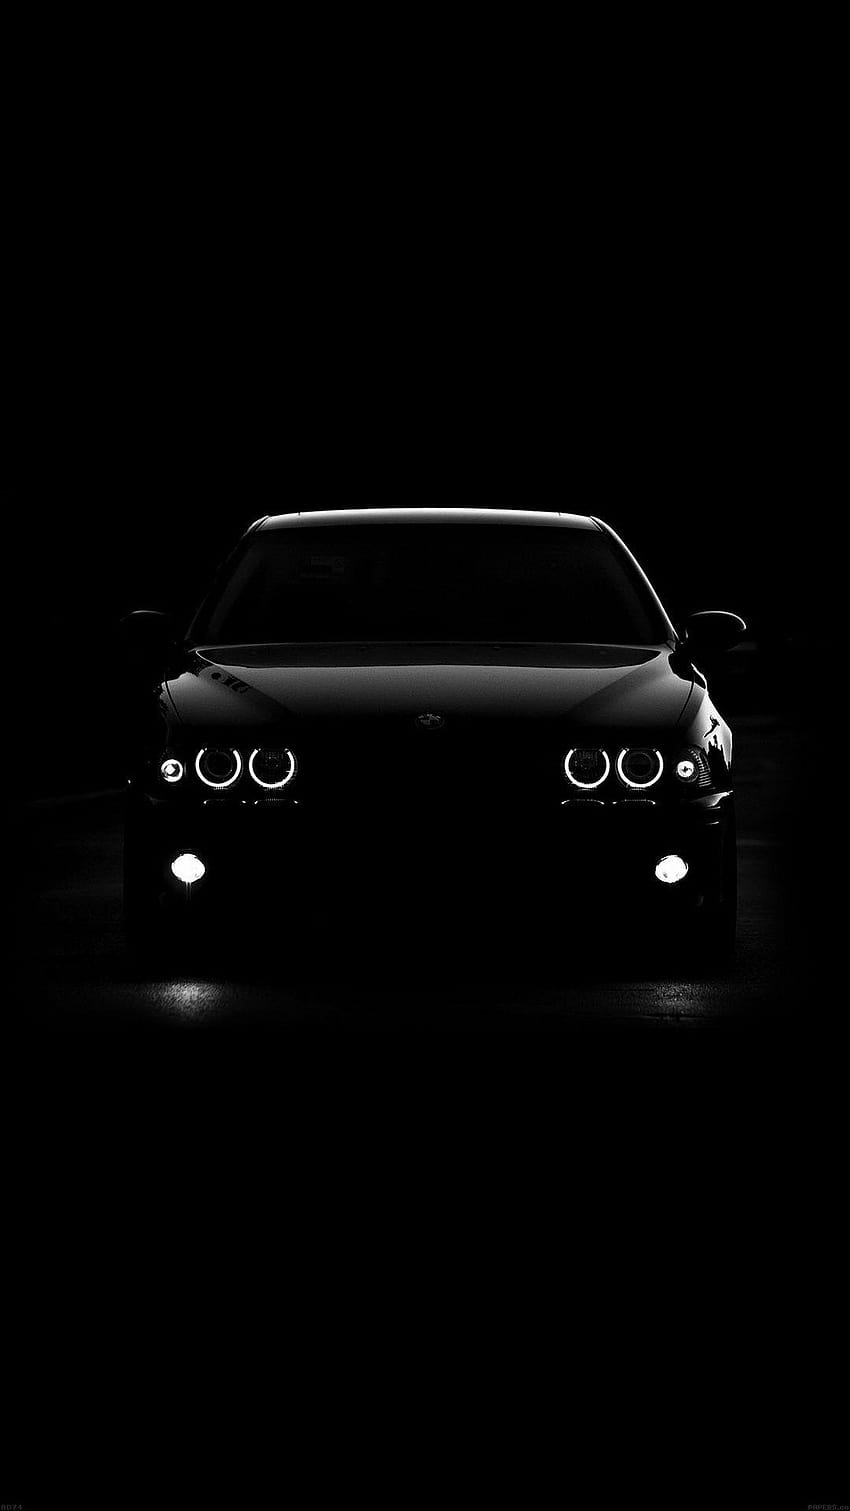 Best 500 Car Headlight Pictures  Download Free Images on Unsplash